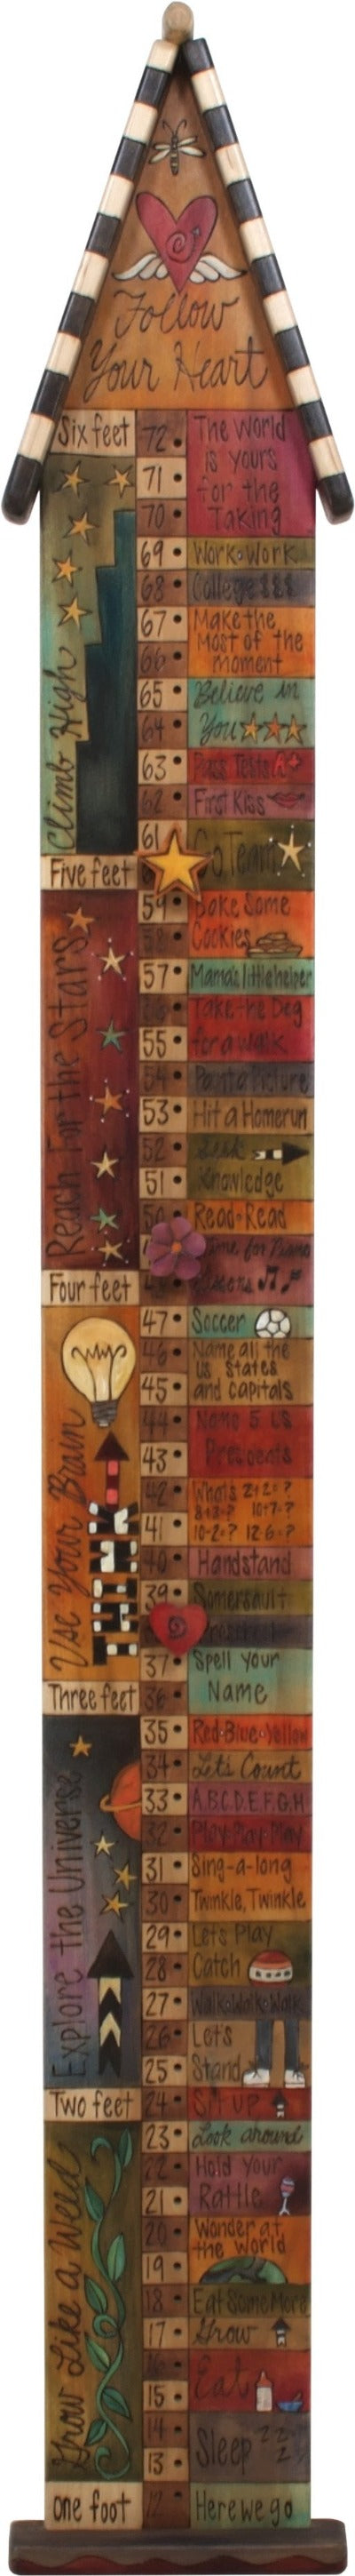 Growth Chart with Pegs